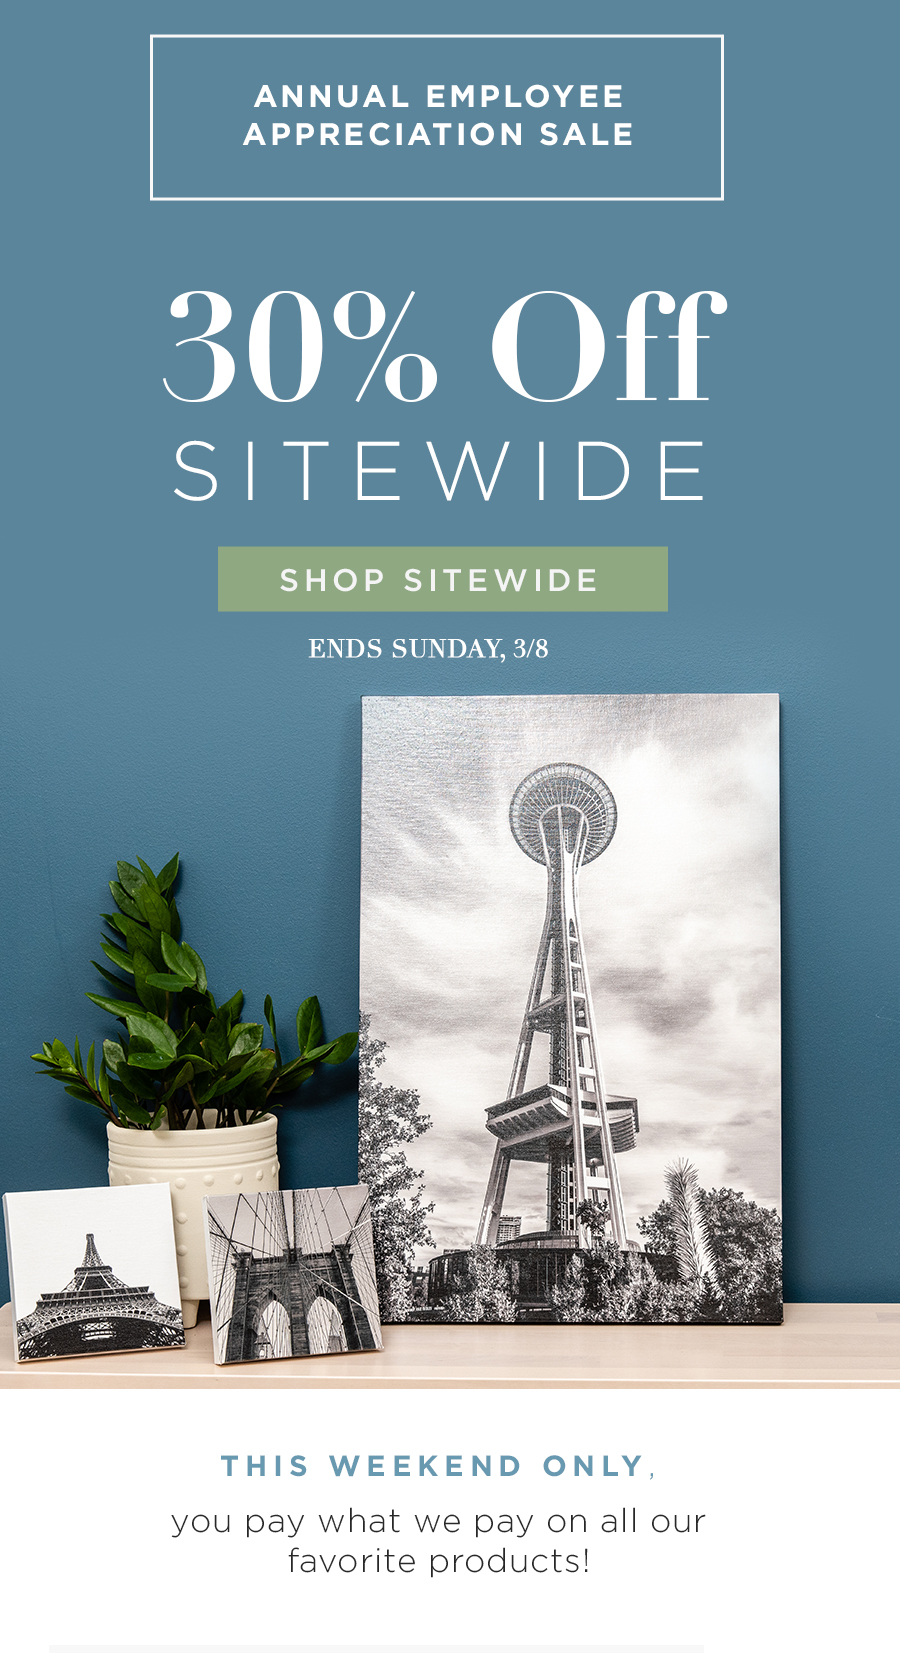 Annual Employee Appreciation Sale  30% Off Sitewide  Ends Sunday, 3/8  SHOP SITEWIDE